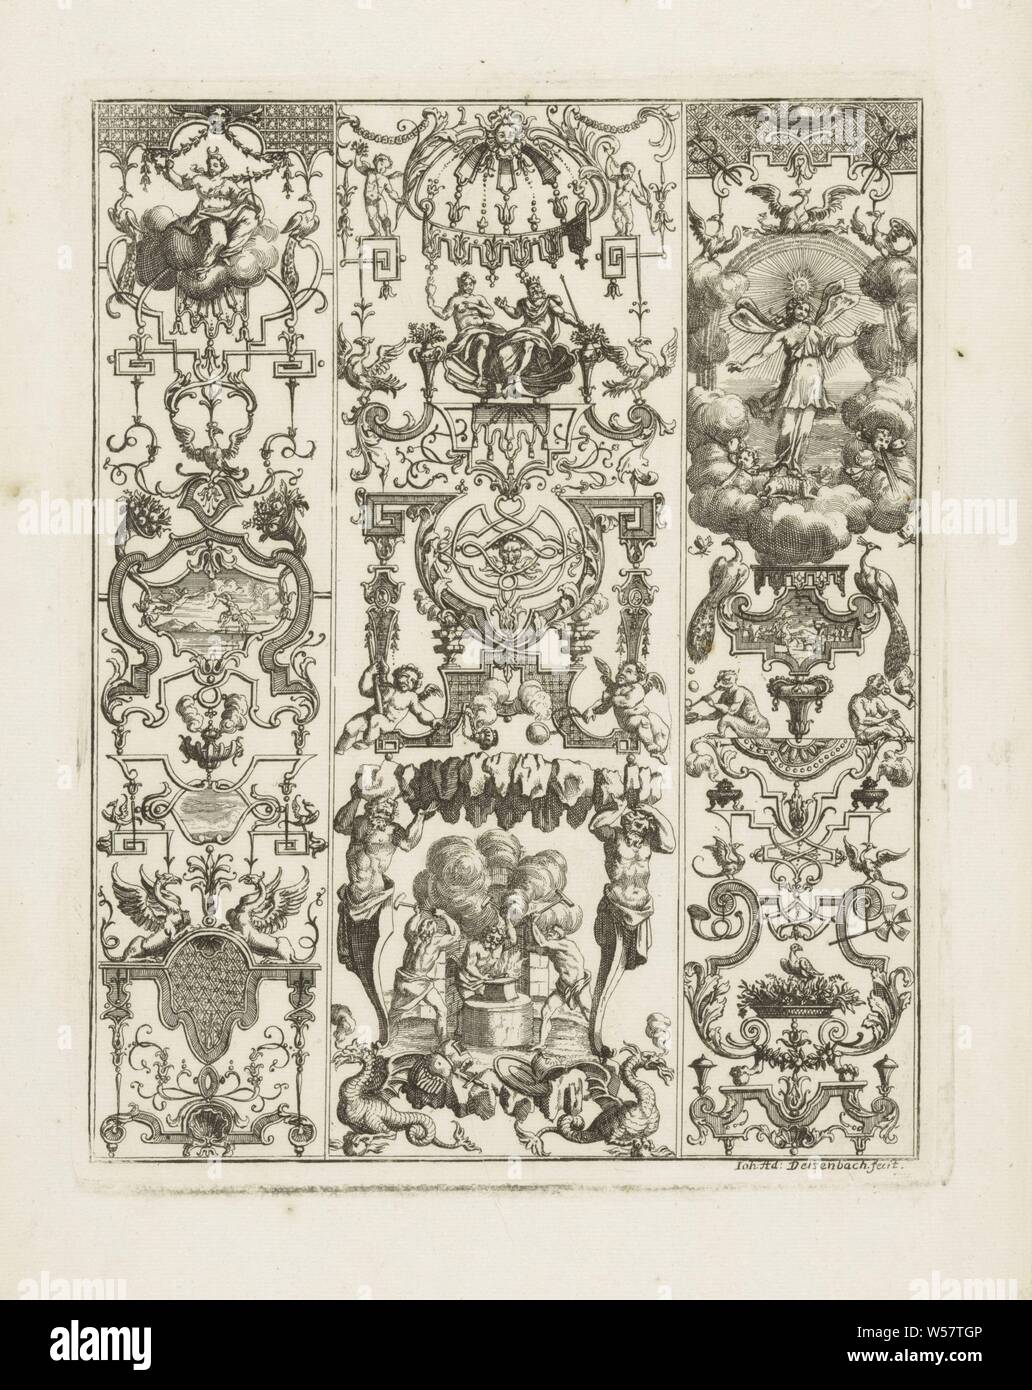 Grotesques with Diana and winged female figure Neues Groteschgen-Werk (series title), Three pilasters with grotesques and various mythical figures and scenes, ornament, grotesque, (story of) Diana (Artemis), Abstract Ideas and Concepts (clothed with wings), Johann Adam Delsenbach (mentioned on object), Neurenberg, 1700 - 1725, paper, etching, h 218 mm × w 170 mm Stock Photo